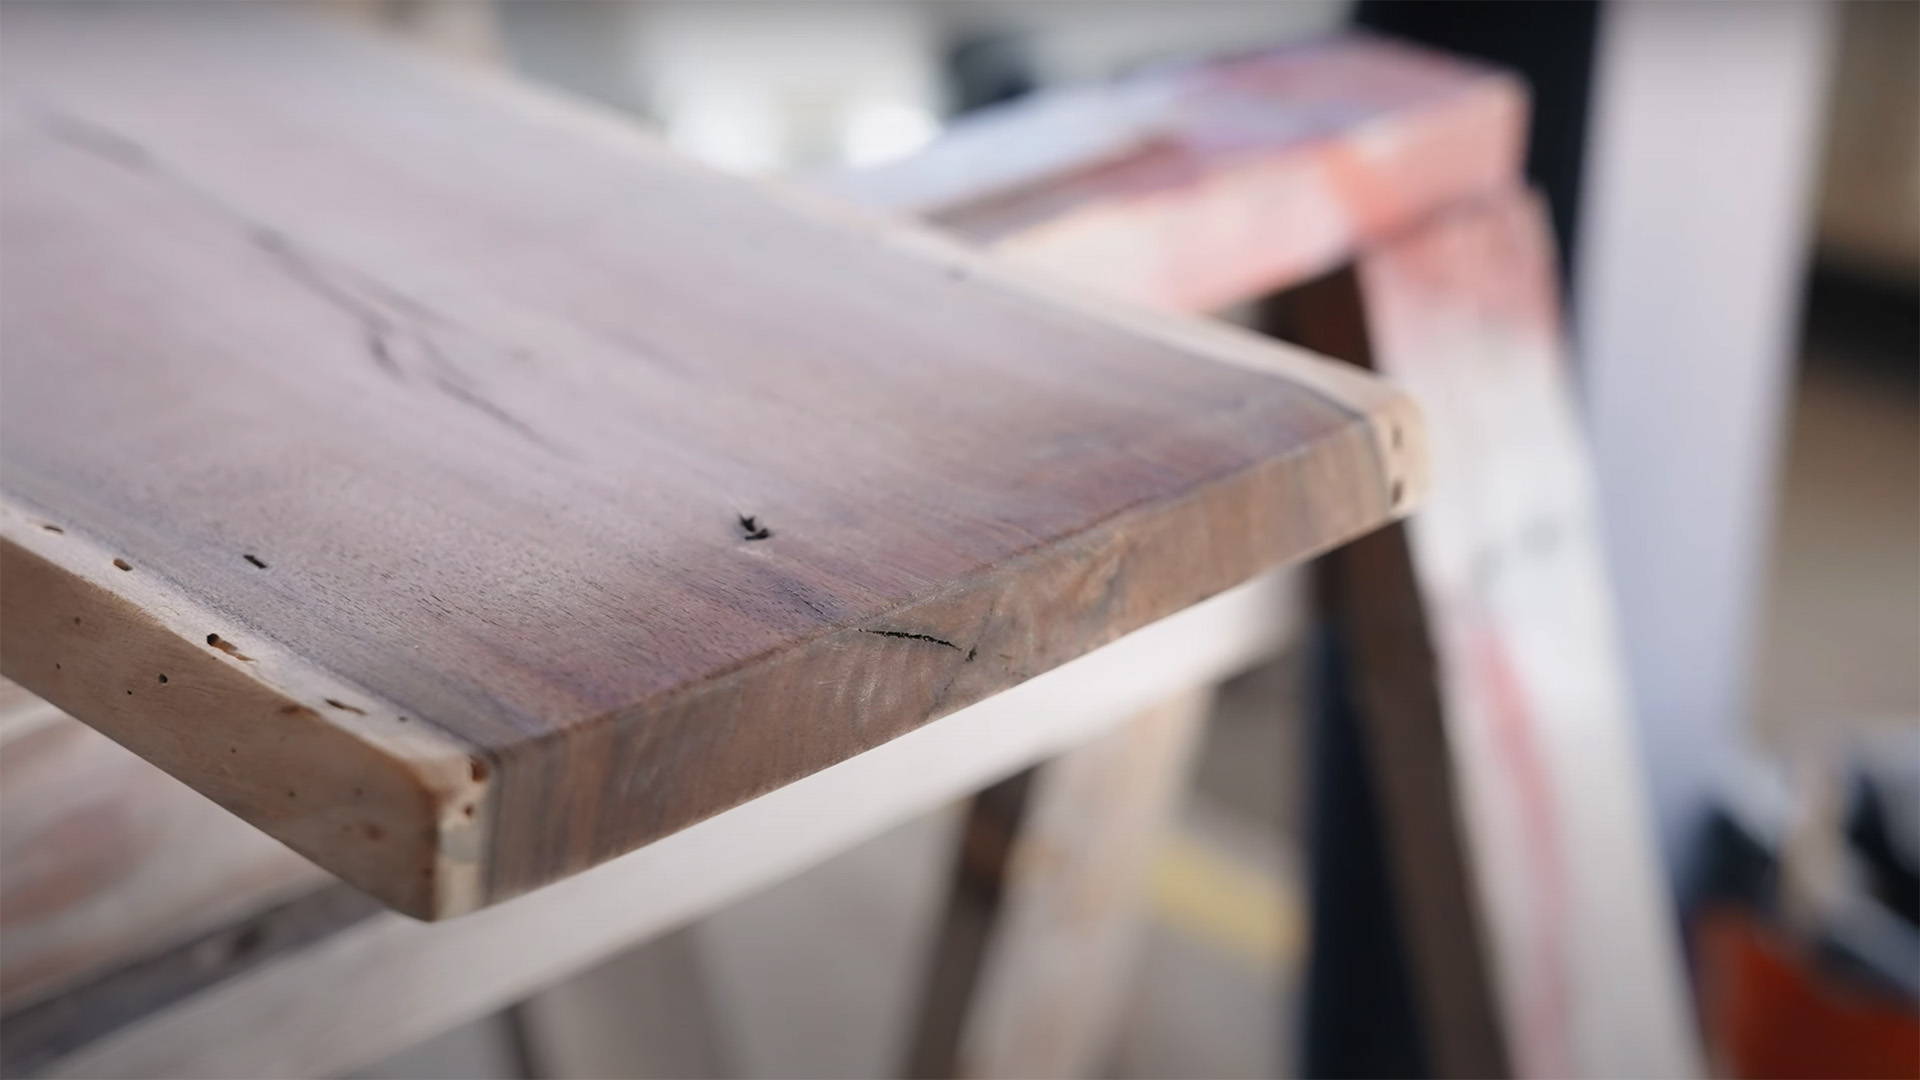 7 Pro-Approved Tips for How to Sand Woodwork by Hand (DIY